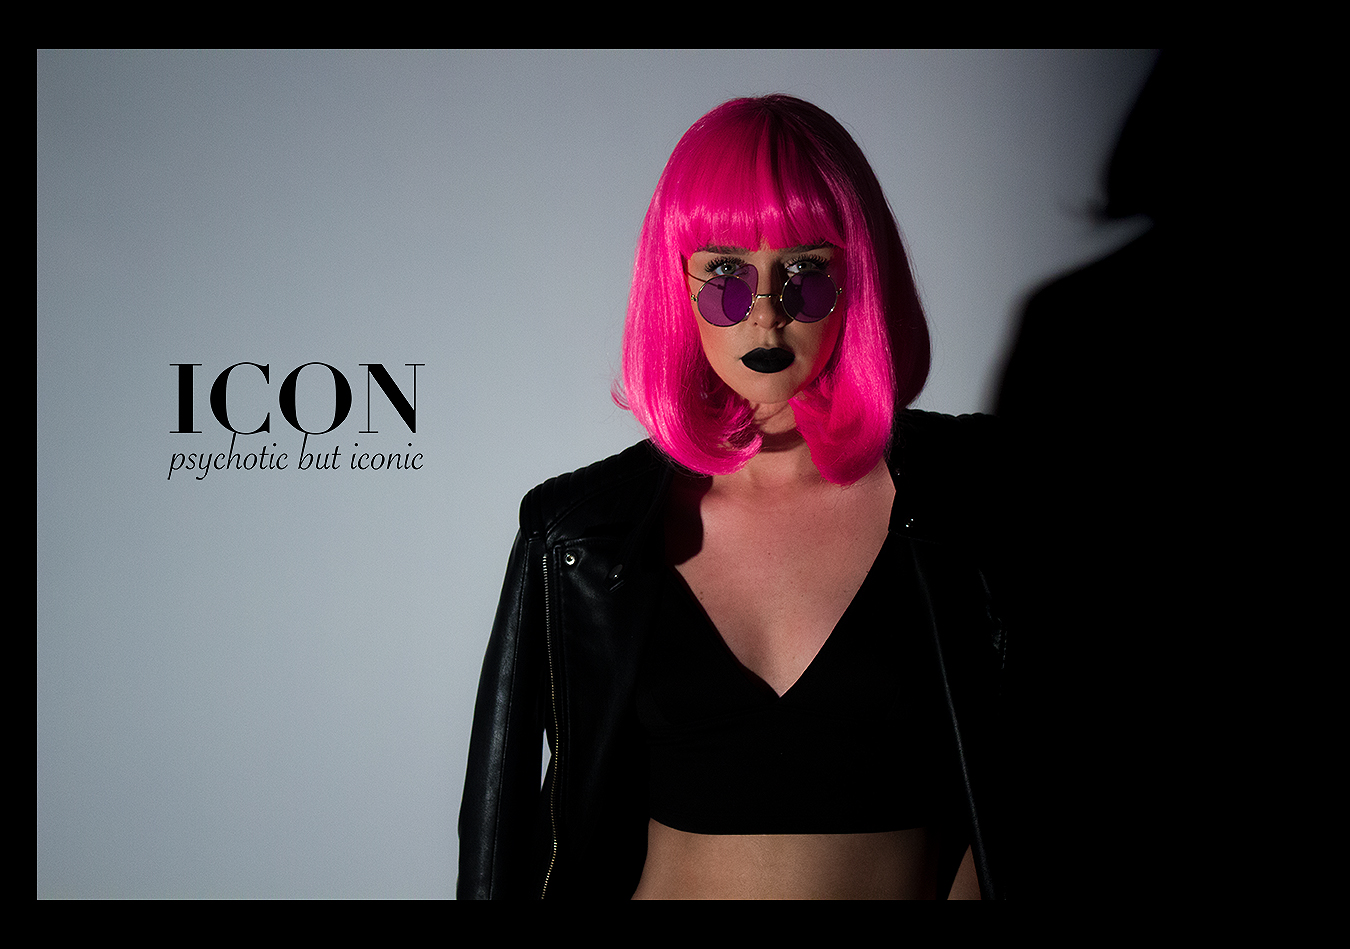 RIA_VAIDYA_FASHION_BRAND_PHOTOGRAPHY_ICON_CLOTHING_LINE_GIRL_WOMAN_MONOCHROME_MINIMALIST_CLASSIC_CHIC_BLACK_WIG_HIGH_SUNGLASSES_COLOR_HAIR_PINK_EYES_EYELASHES_STARE_HORIZONTAL_LANDSCAPE_CROP_TOP_LEATHER_JACKET